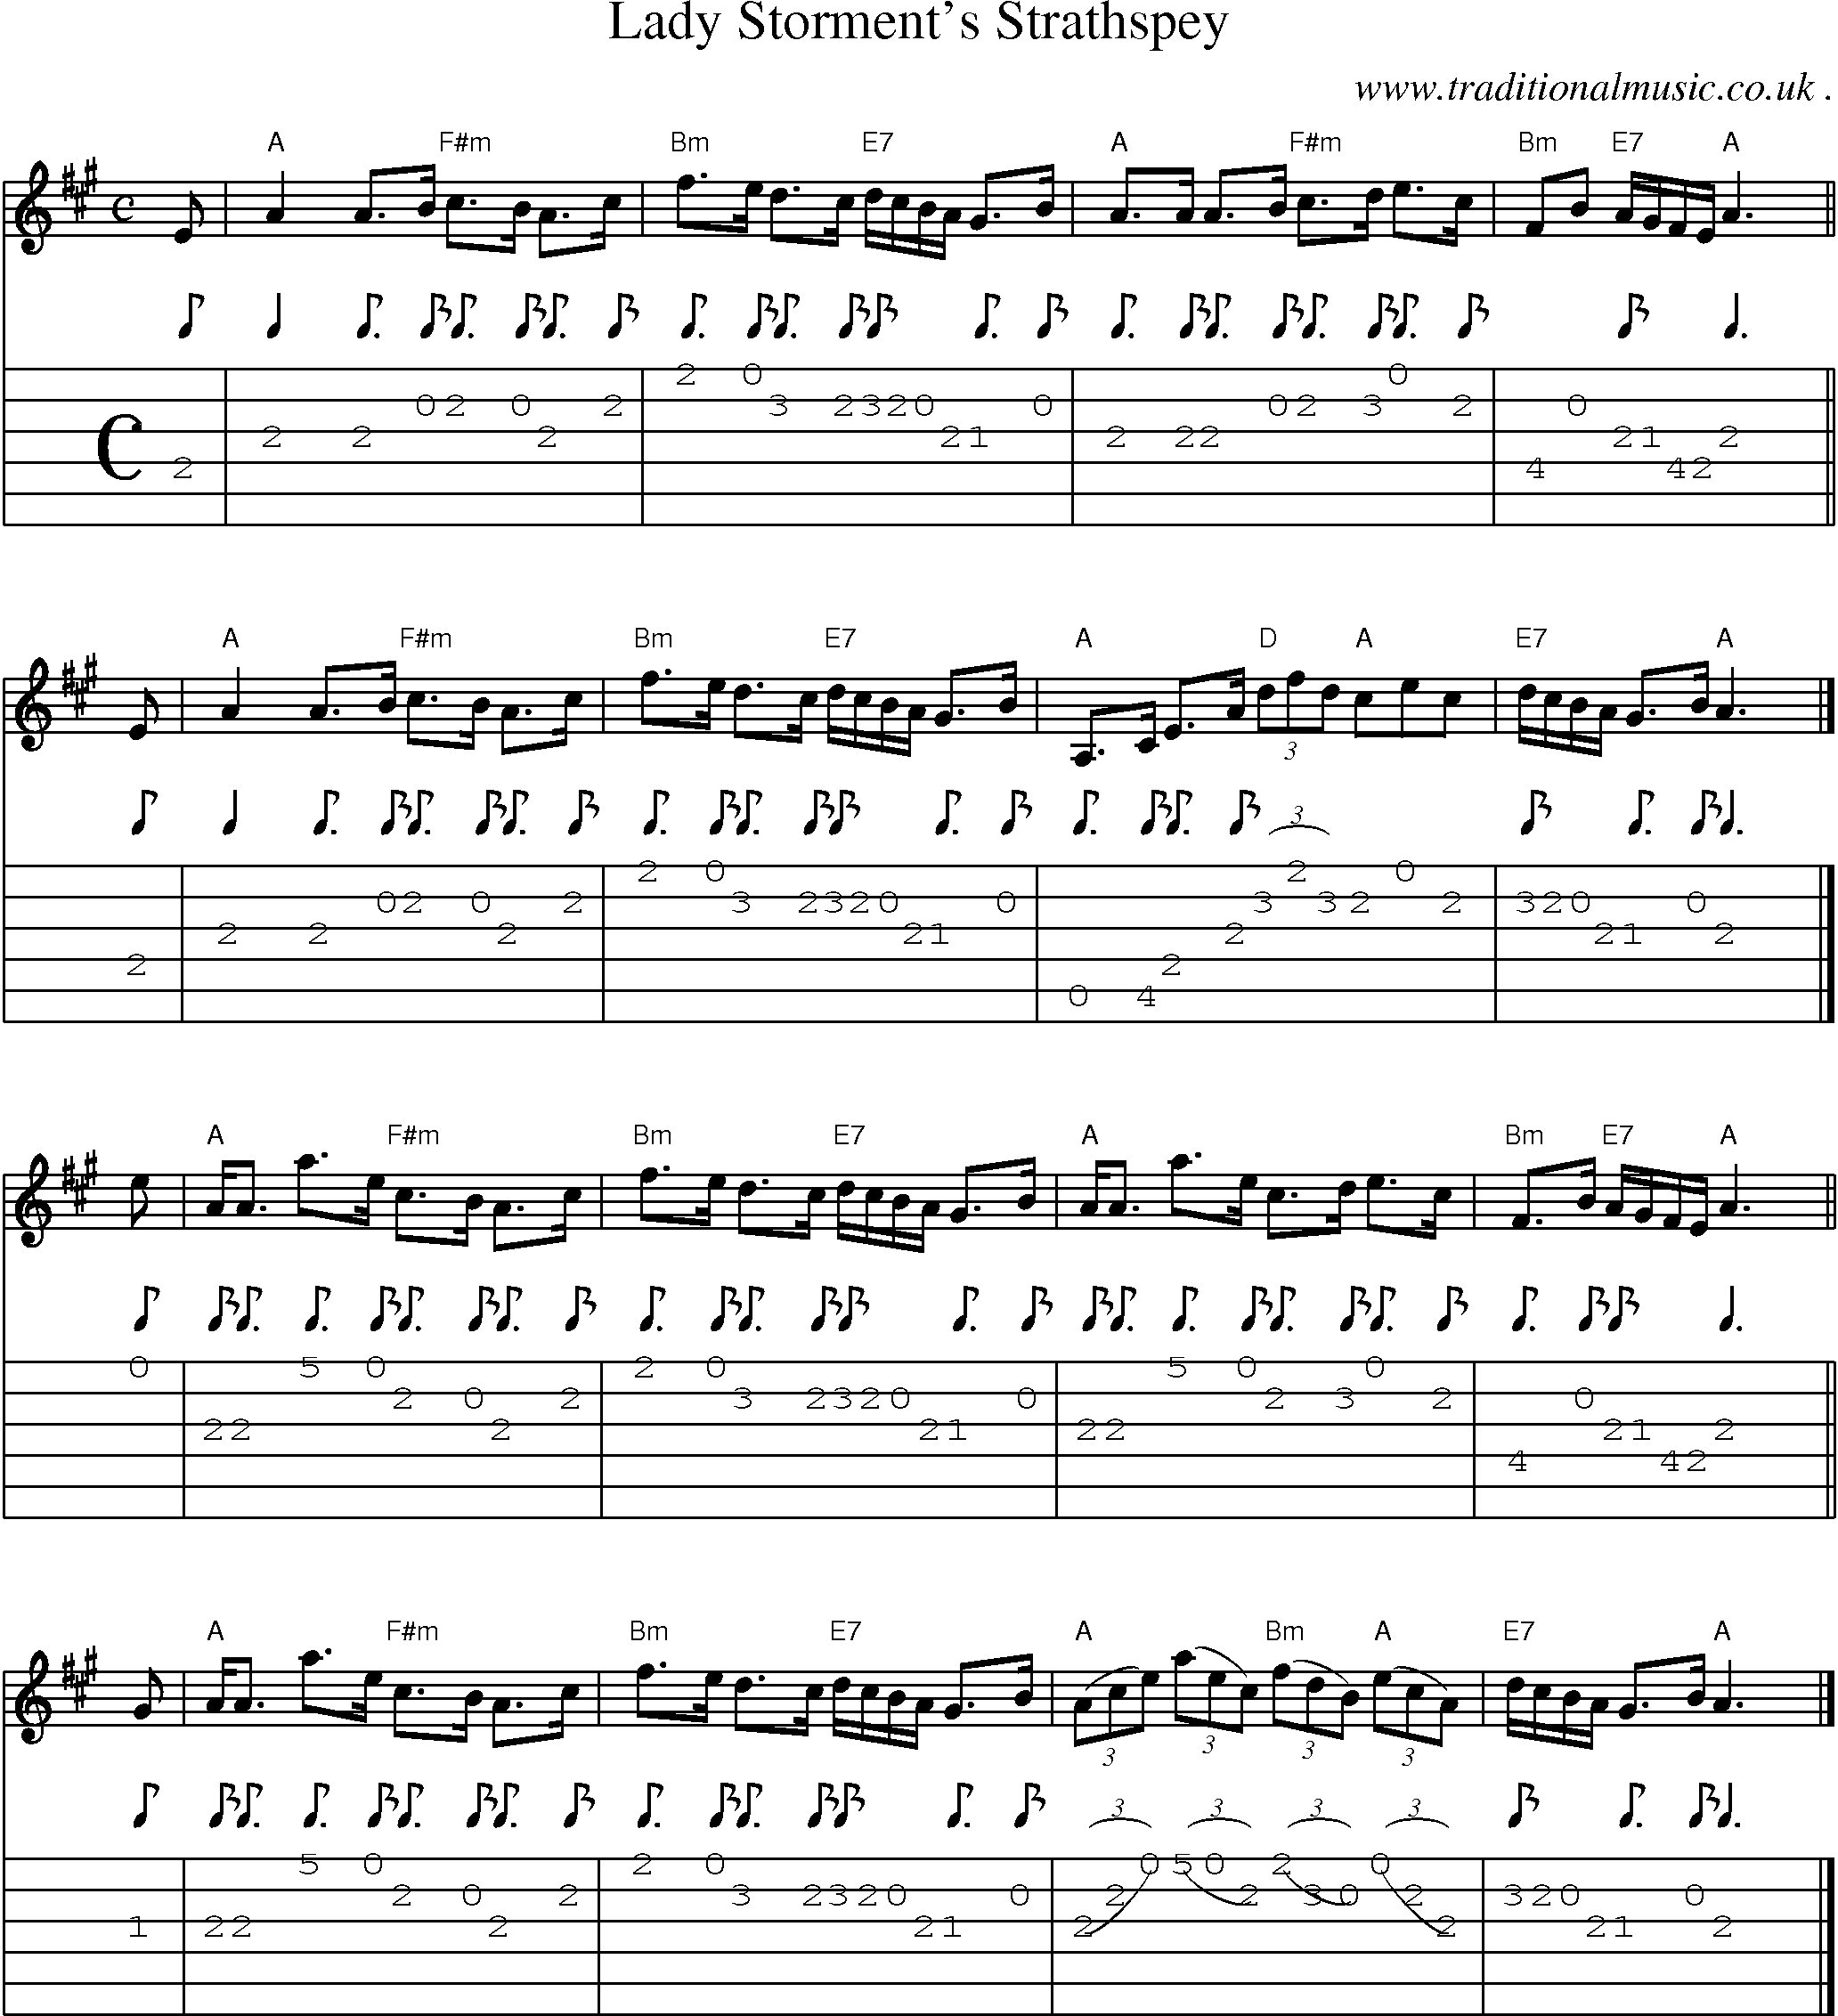 Sheet-music  score, Chords and Guitar Tabs for Lady Storments Strathspey